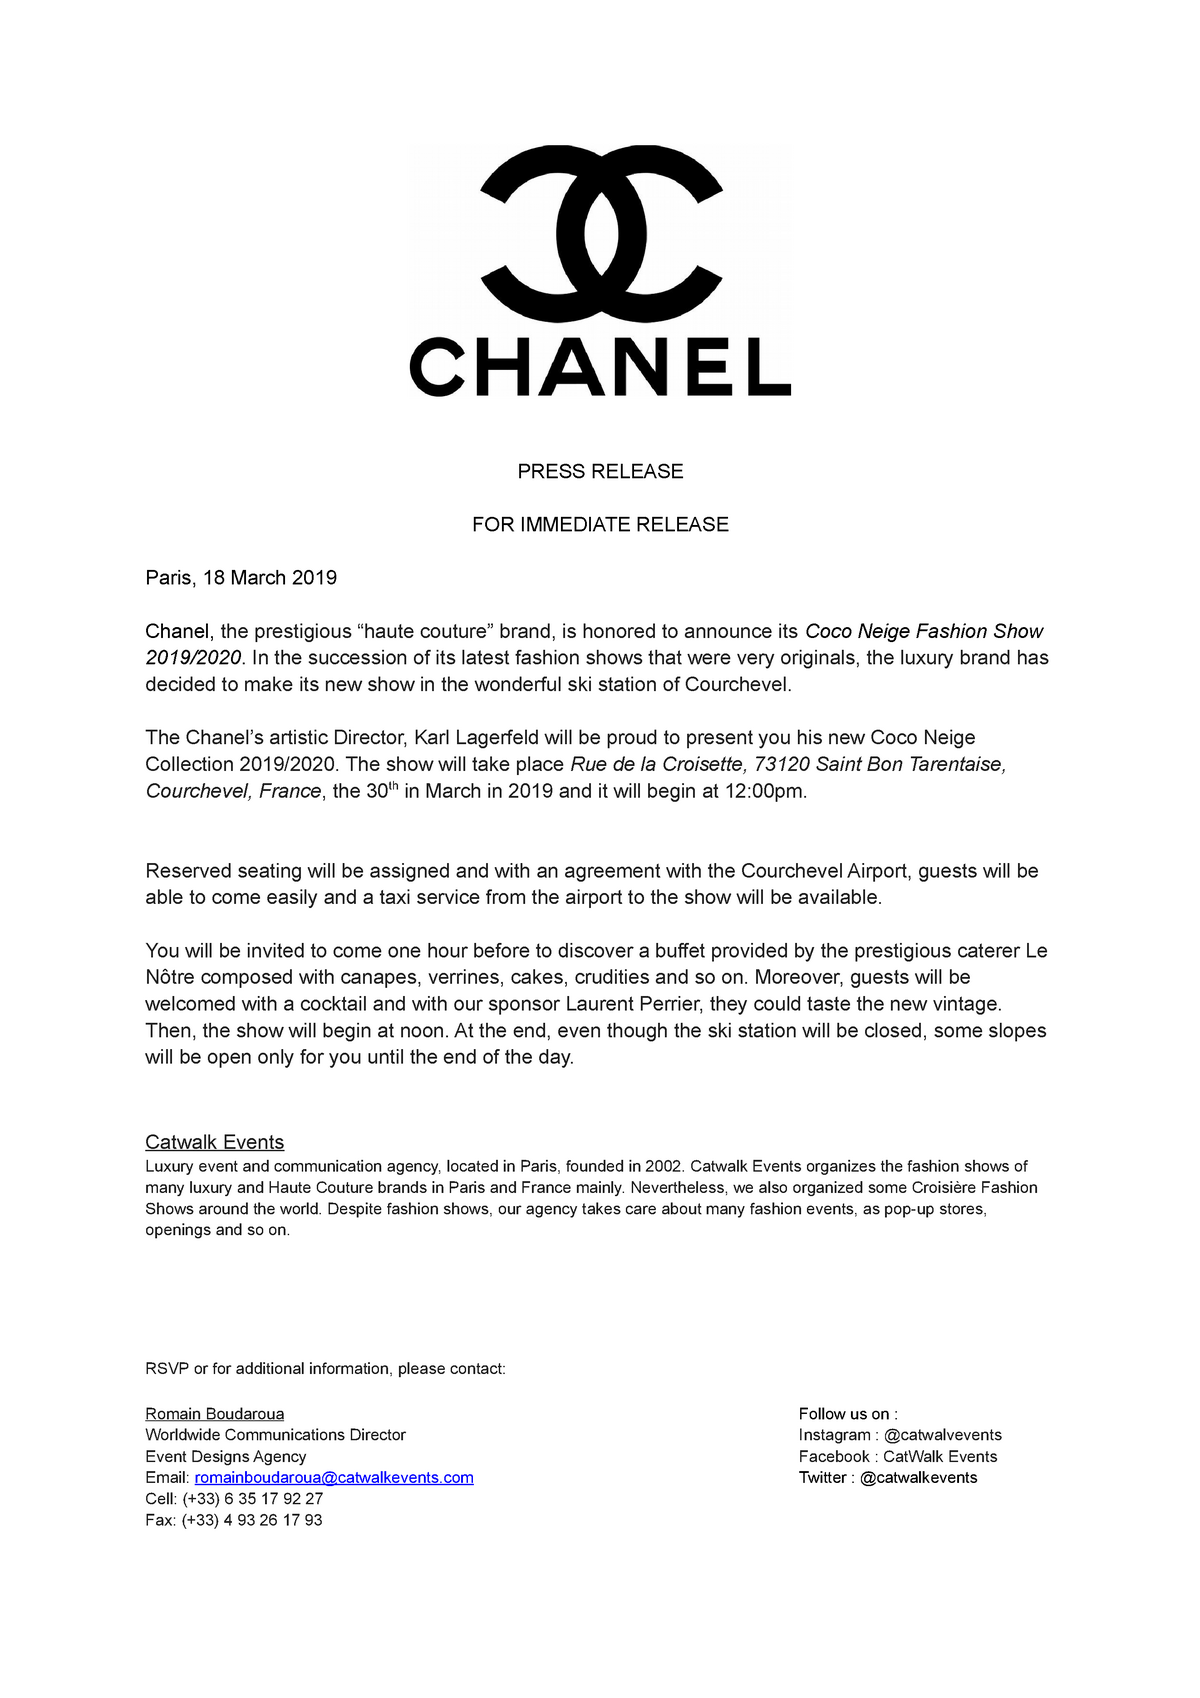 How to Write a Press Release for a Fashion Brand